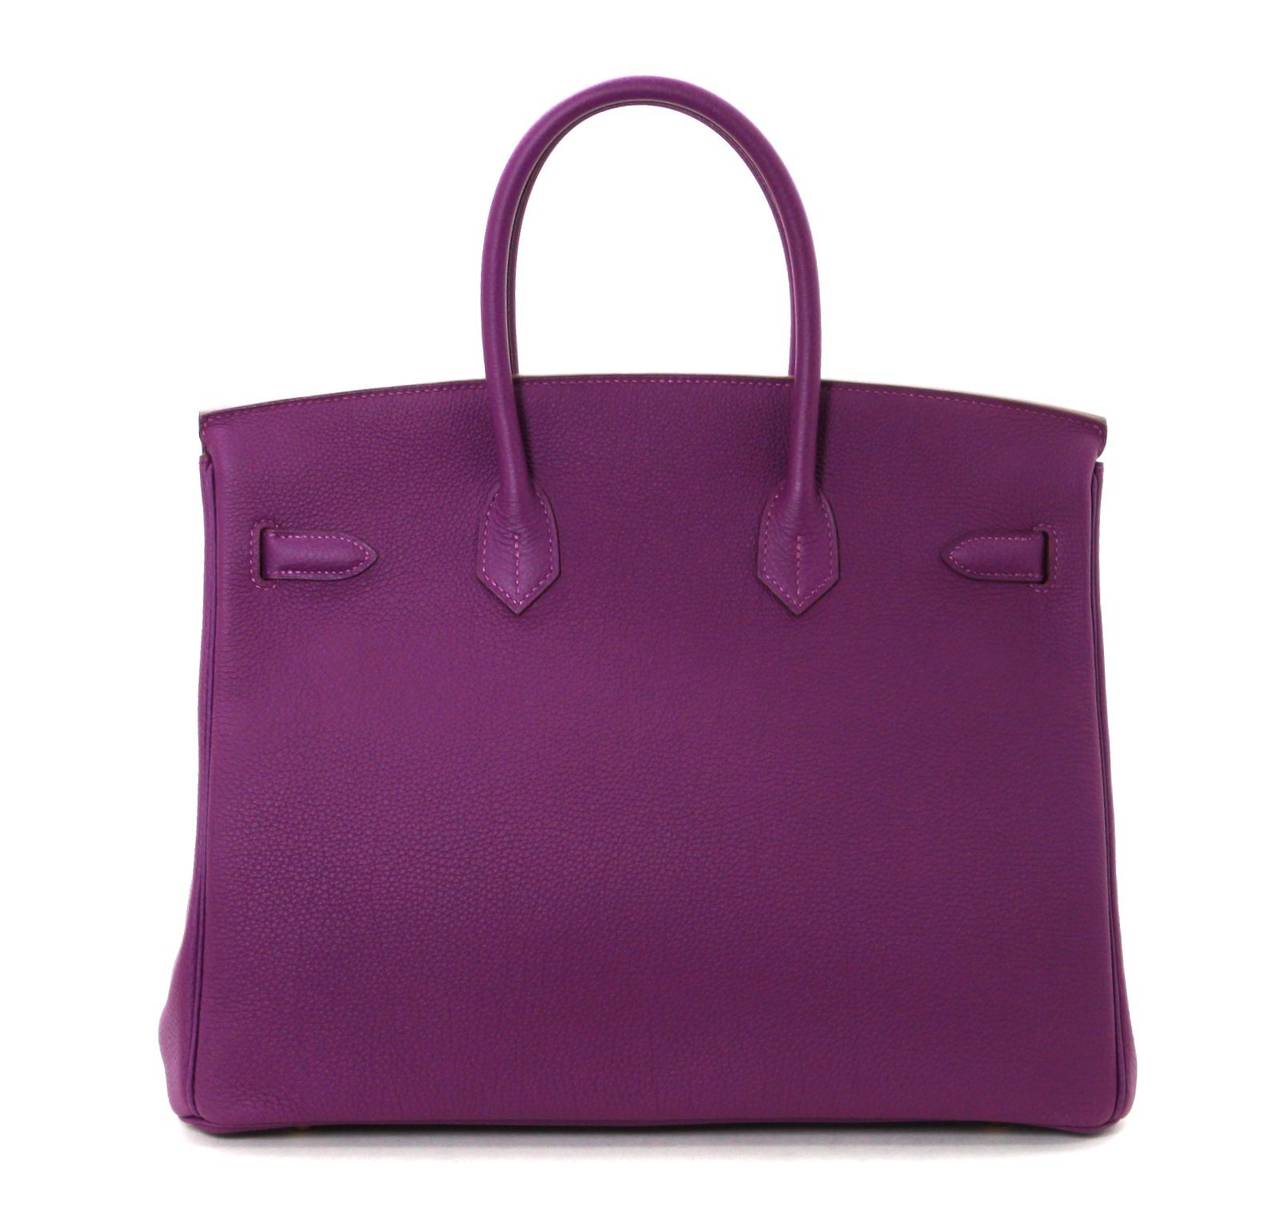 Pristine, new and never carried Hermès Birkin Bag in Anemone Togo Leather, 35 cm size.   Crafted by hand and considered by many as the epitome of luxury items, Birkins are extremely difficult to get. Scratch resistant and beautifully textured,